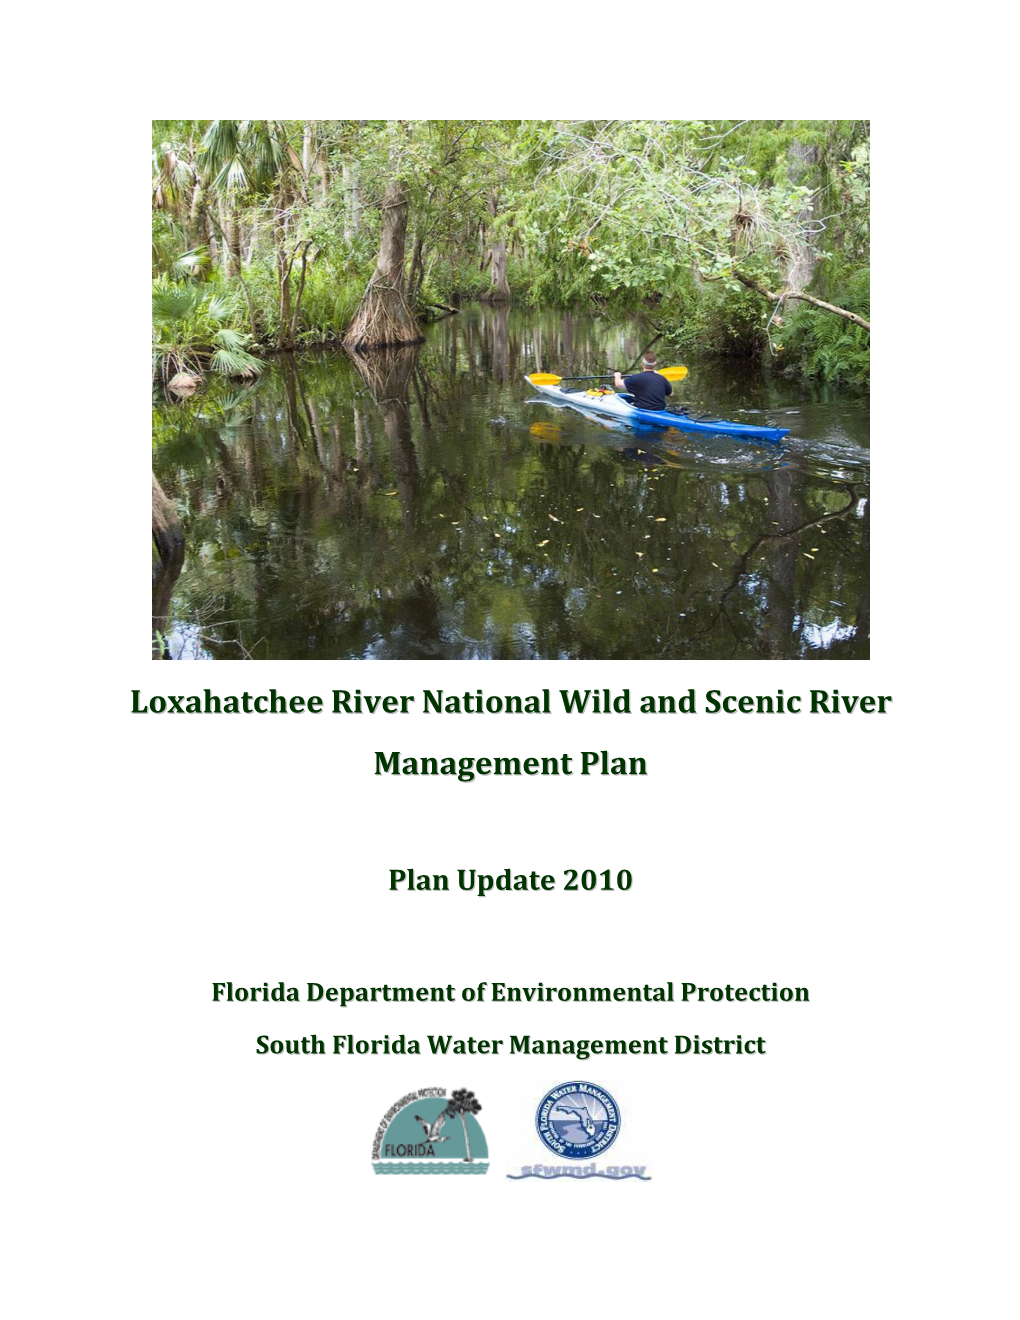 Loxahatchee River National Wild and Scenic River Management Plan Ensures That Special Consideration and Review Is Given to the Watershed Surrounding the River